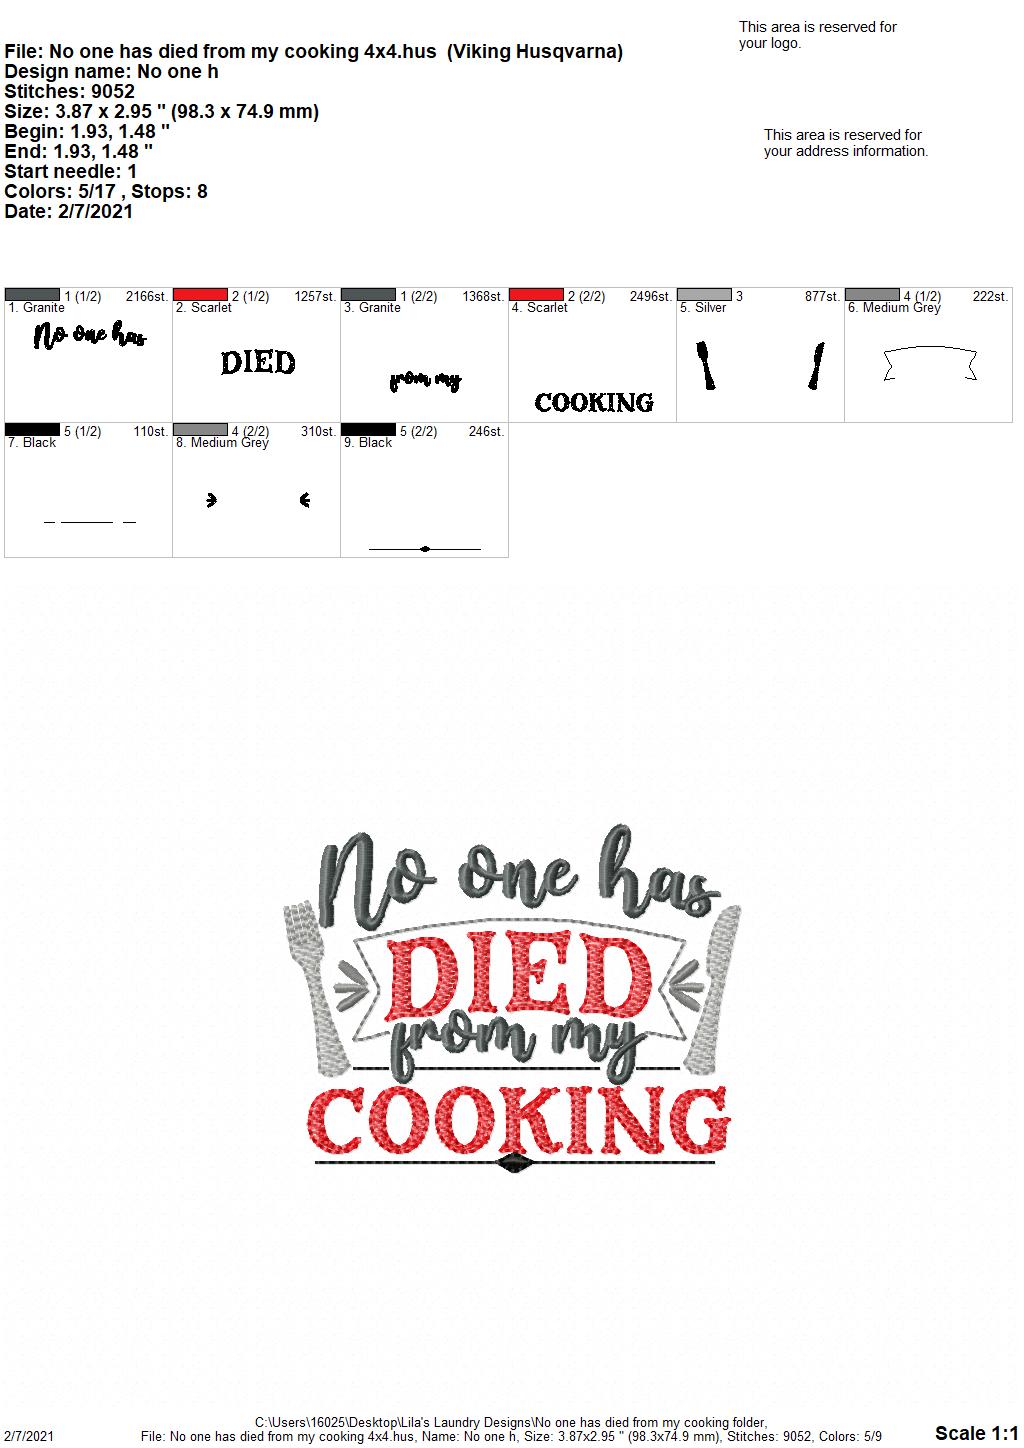 No one has died from my cooking - 3 sizes - digital embroidery design